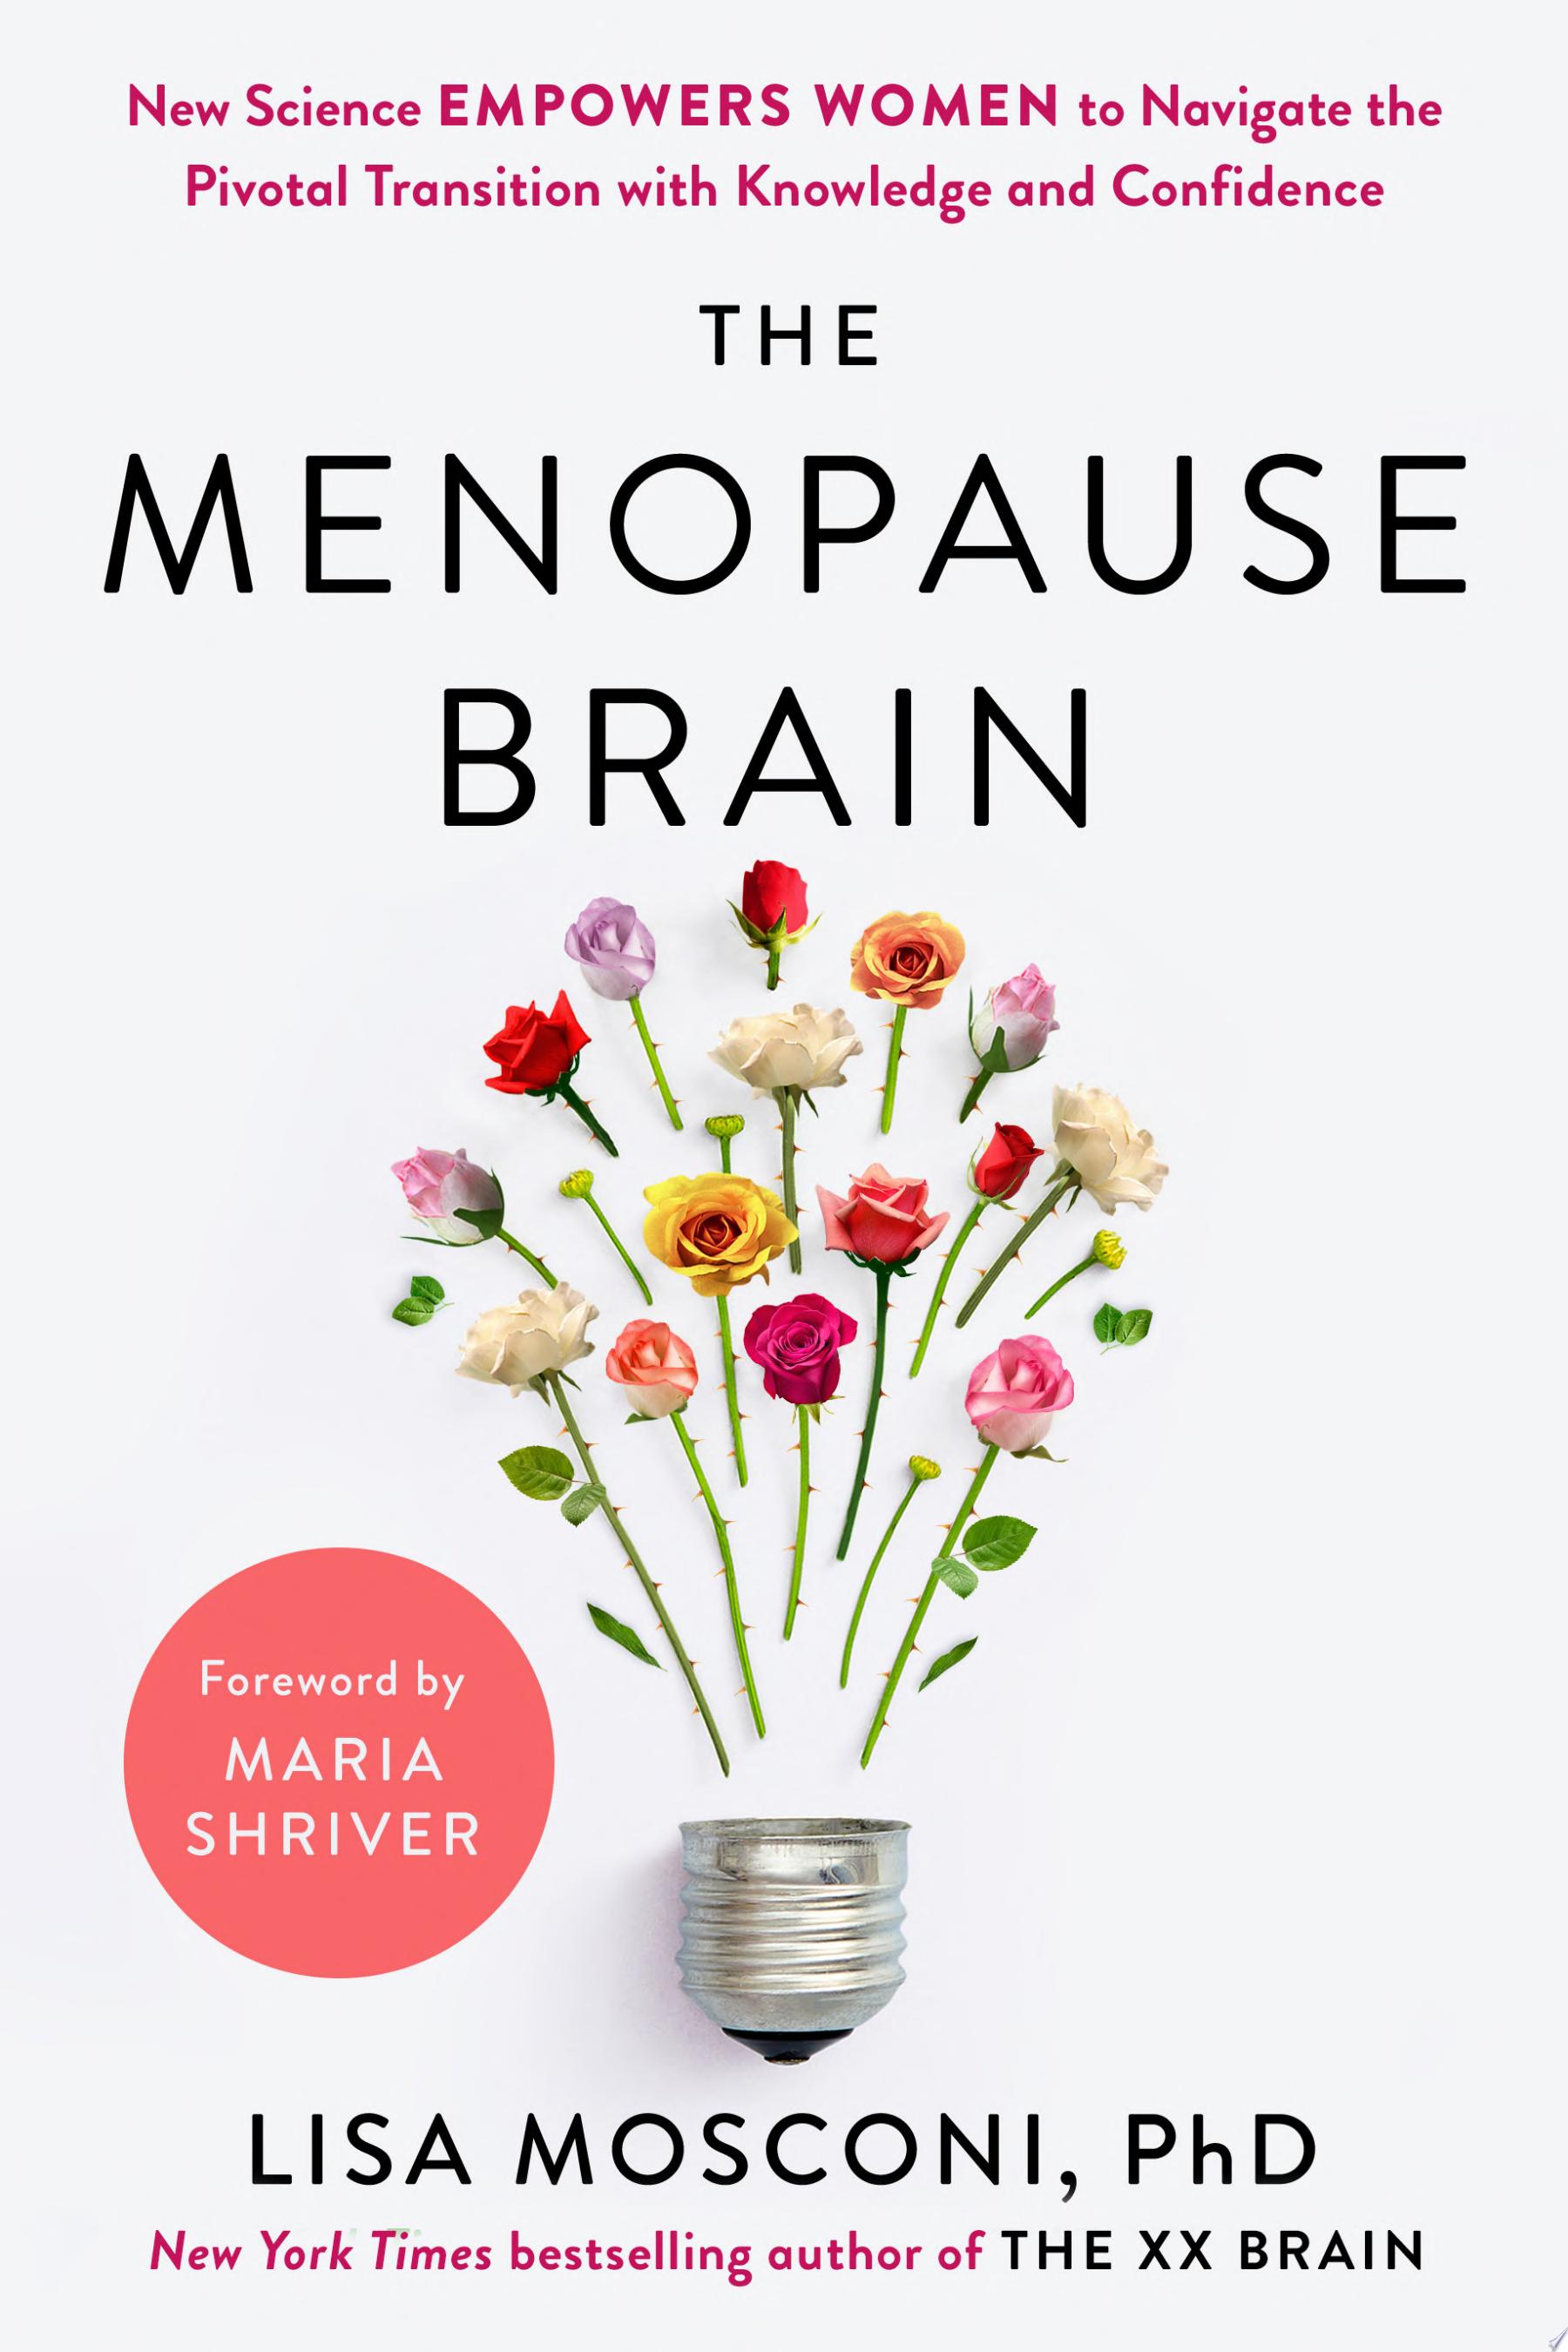 Image for "The Menopause Brain"